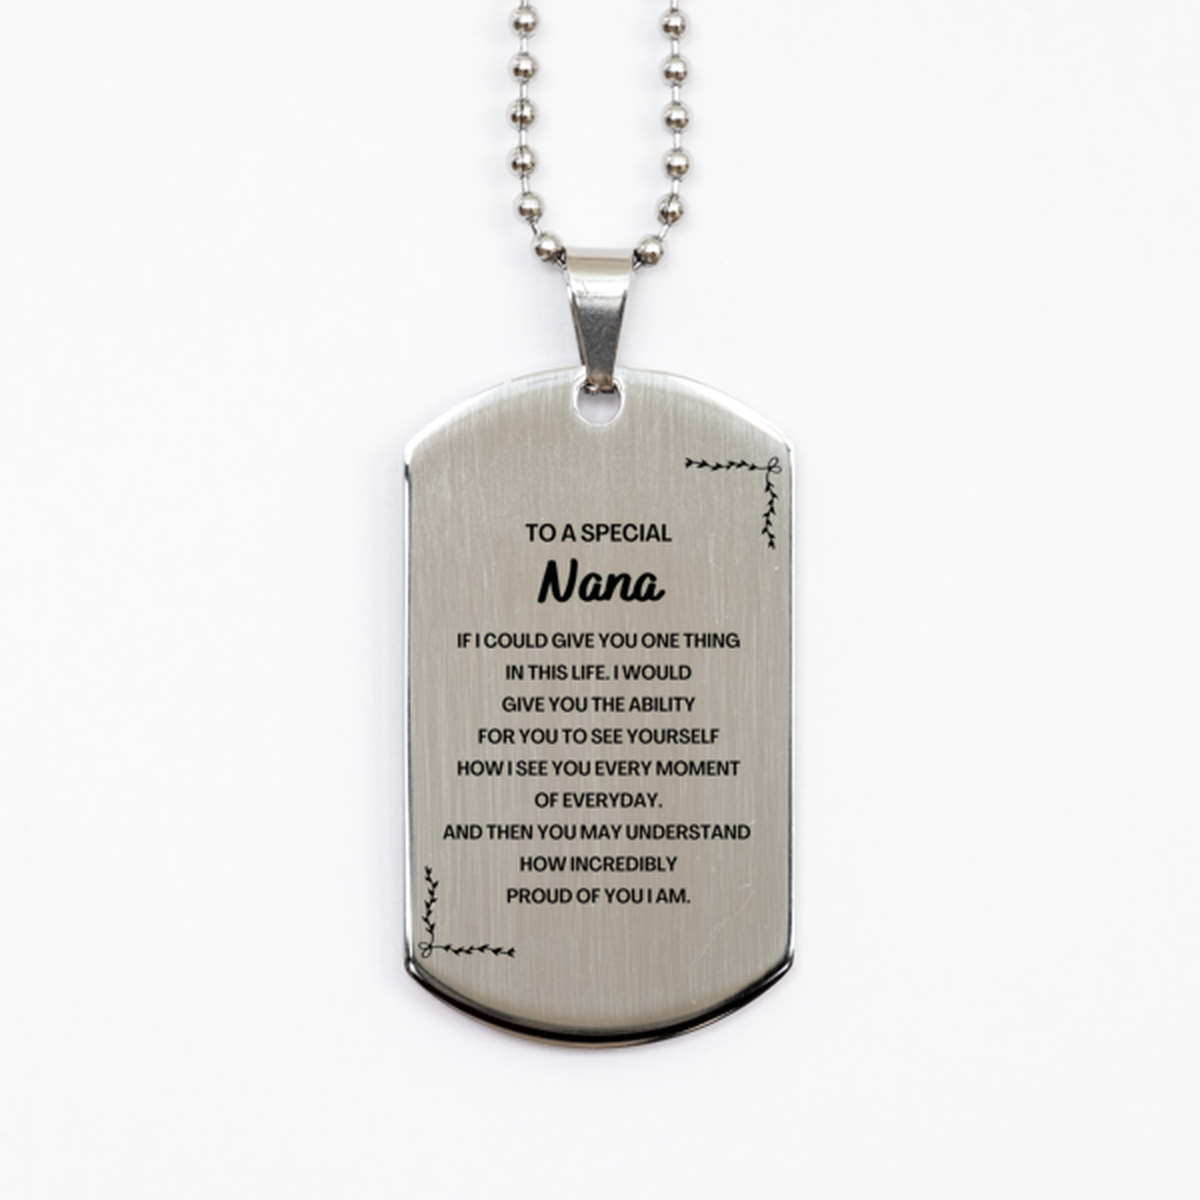 To My Nana Silver Dog Tag, Gifts For Nana Engraved, Inspirational Gifts for Christmas Birthday, Epic Gifts for Nana To A Special Nana how incredibly proud of you I am